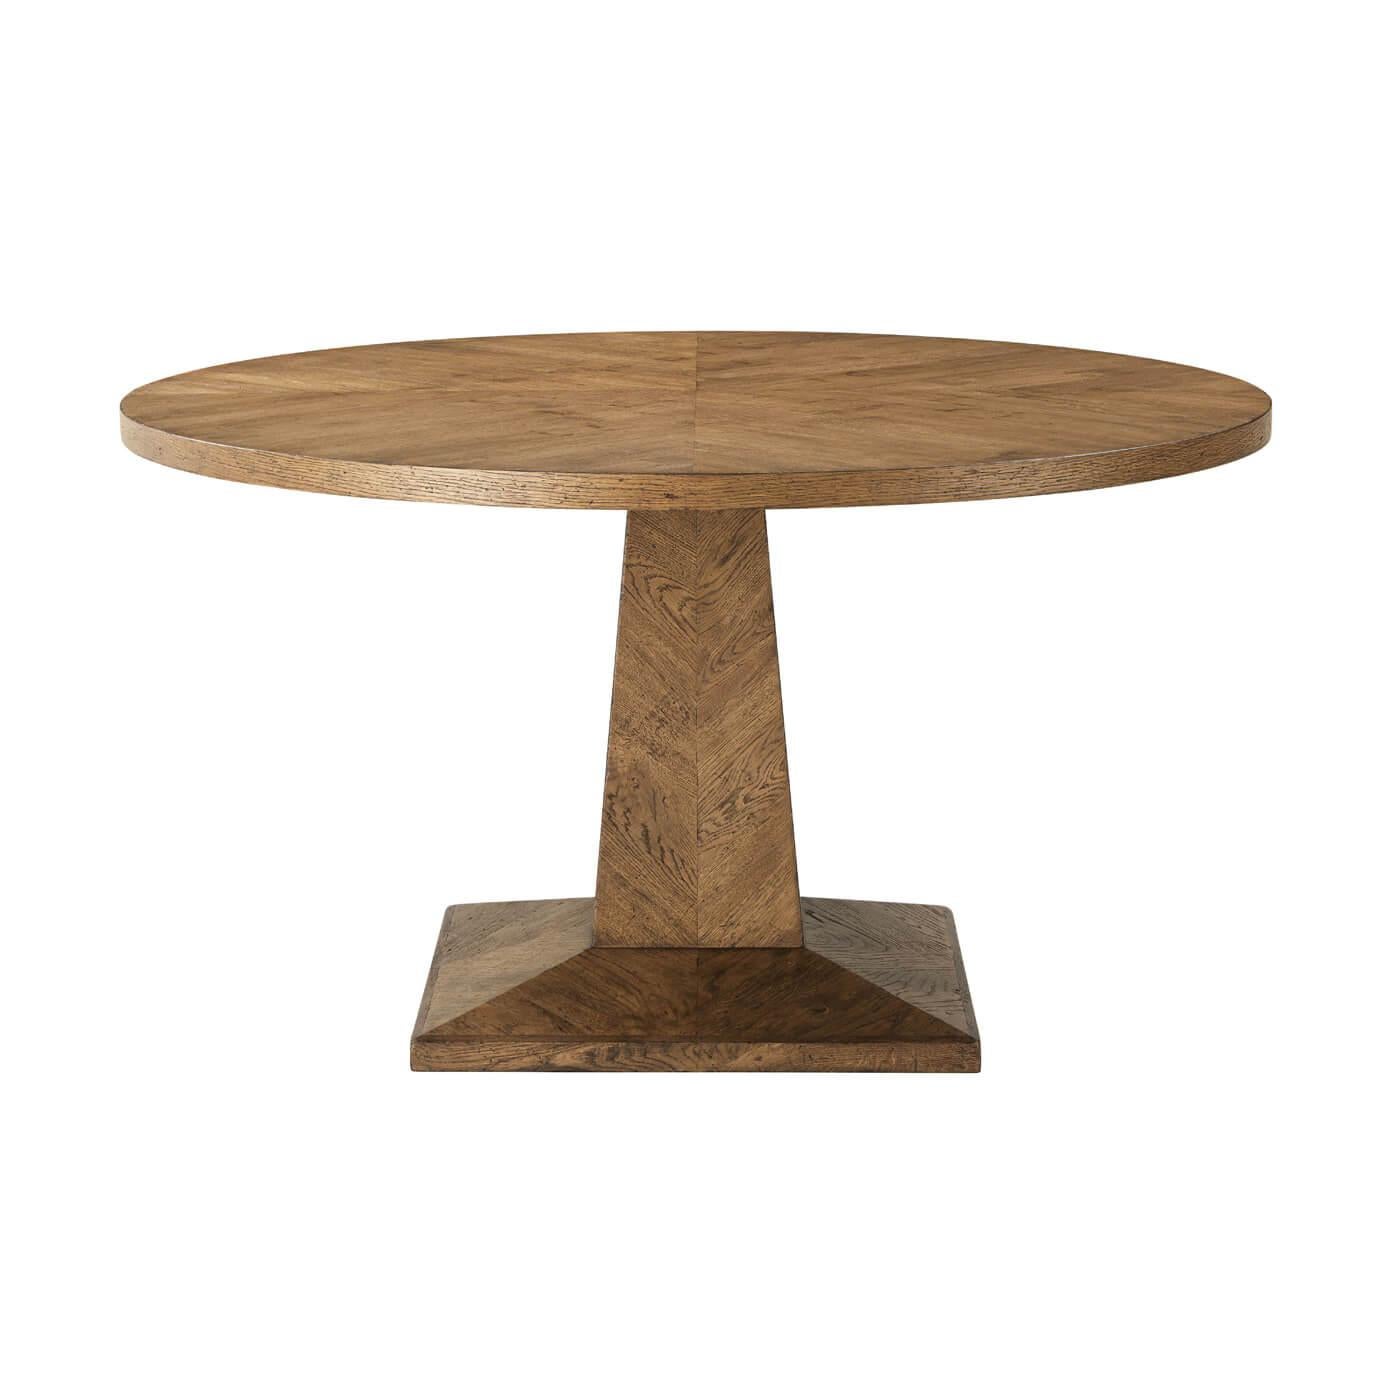 Vietnamese Rustic Oak Parquetry Round Dining Table For Sale